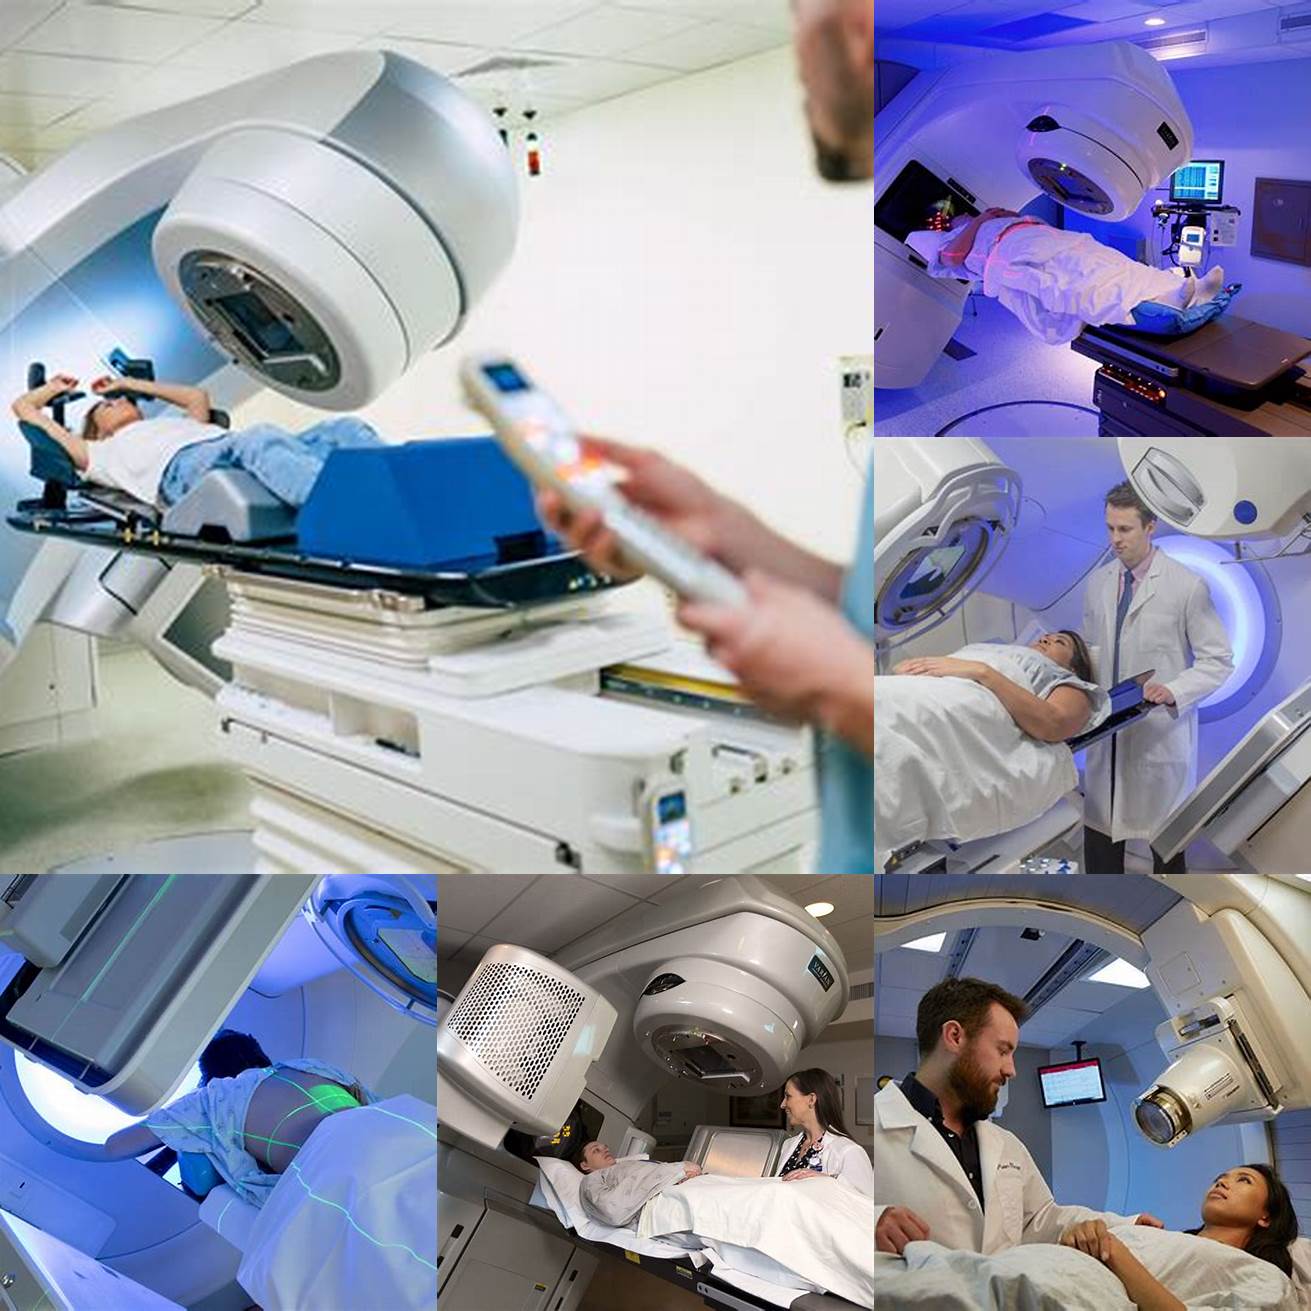 A patient is being considered for radiation therapy to treat stomach cancer and a cat scan is needed to determine the location and size of the tumor